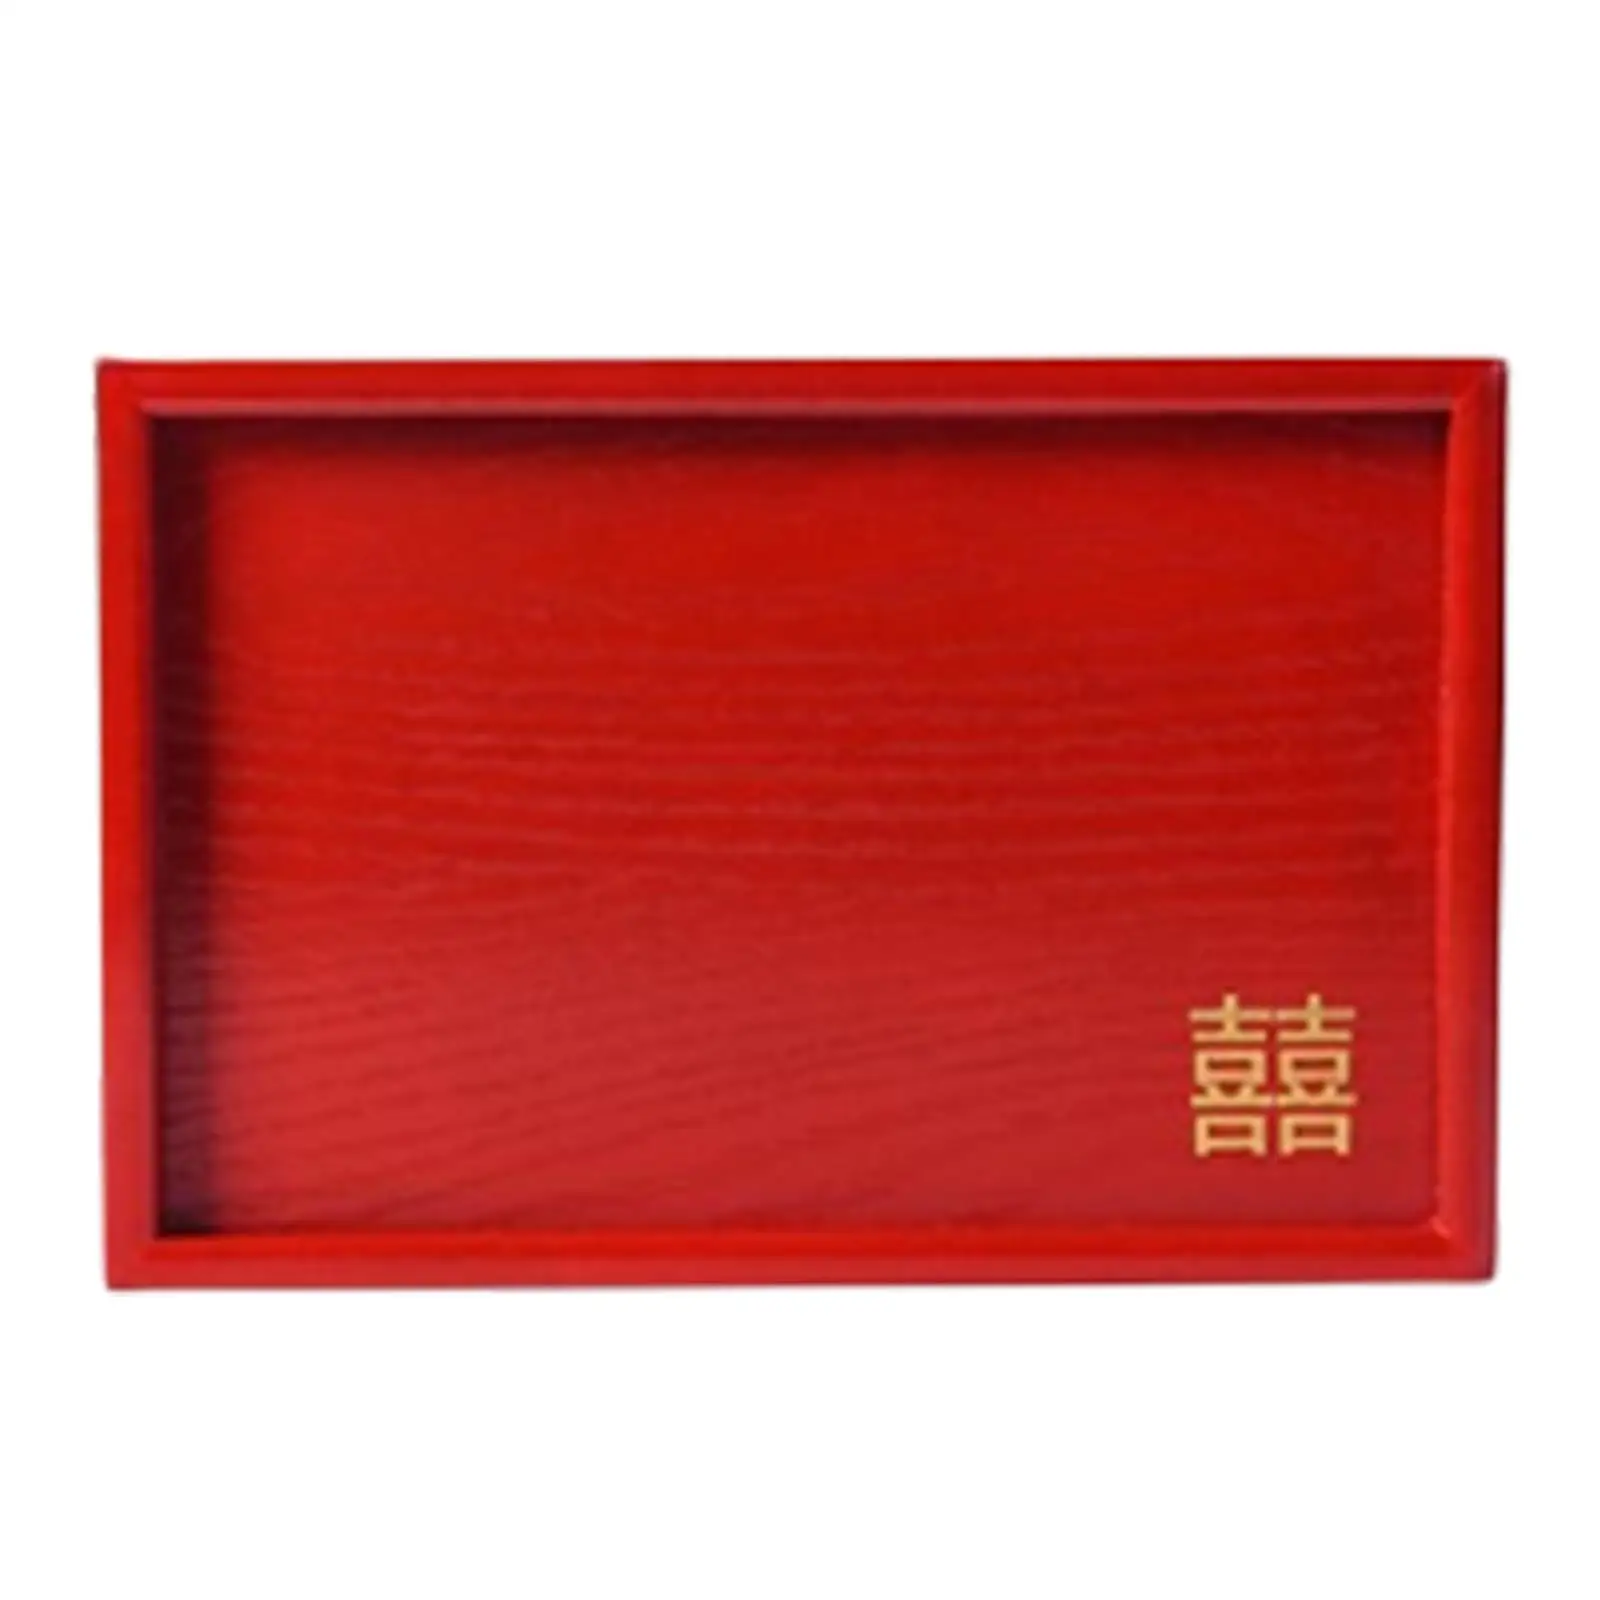 Xi Character Wedding Serving Tray Traditional Fruit Plate for Wedding Supplies Celebration Bridal Shower Counter Festival